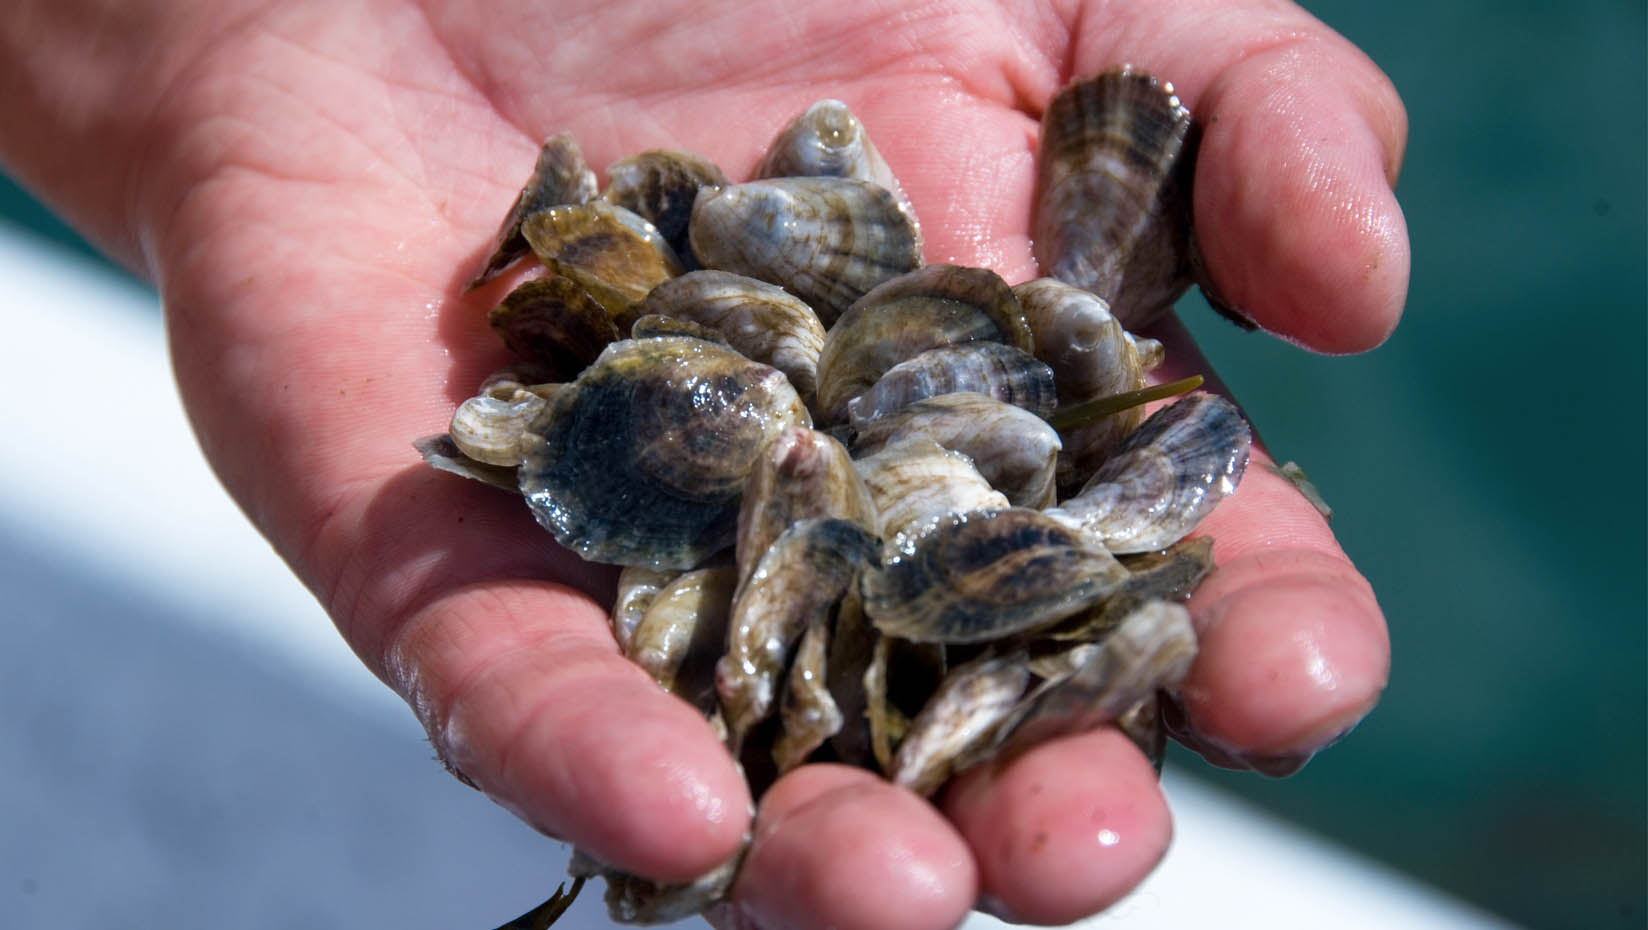 NOAA Sea Grant announces $2.1M to support aquaculture research and extension in Maine - UMaine News - University of Maine - University of Maine